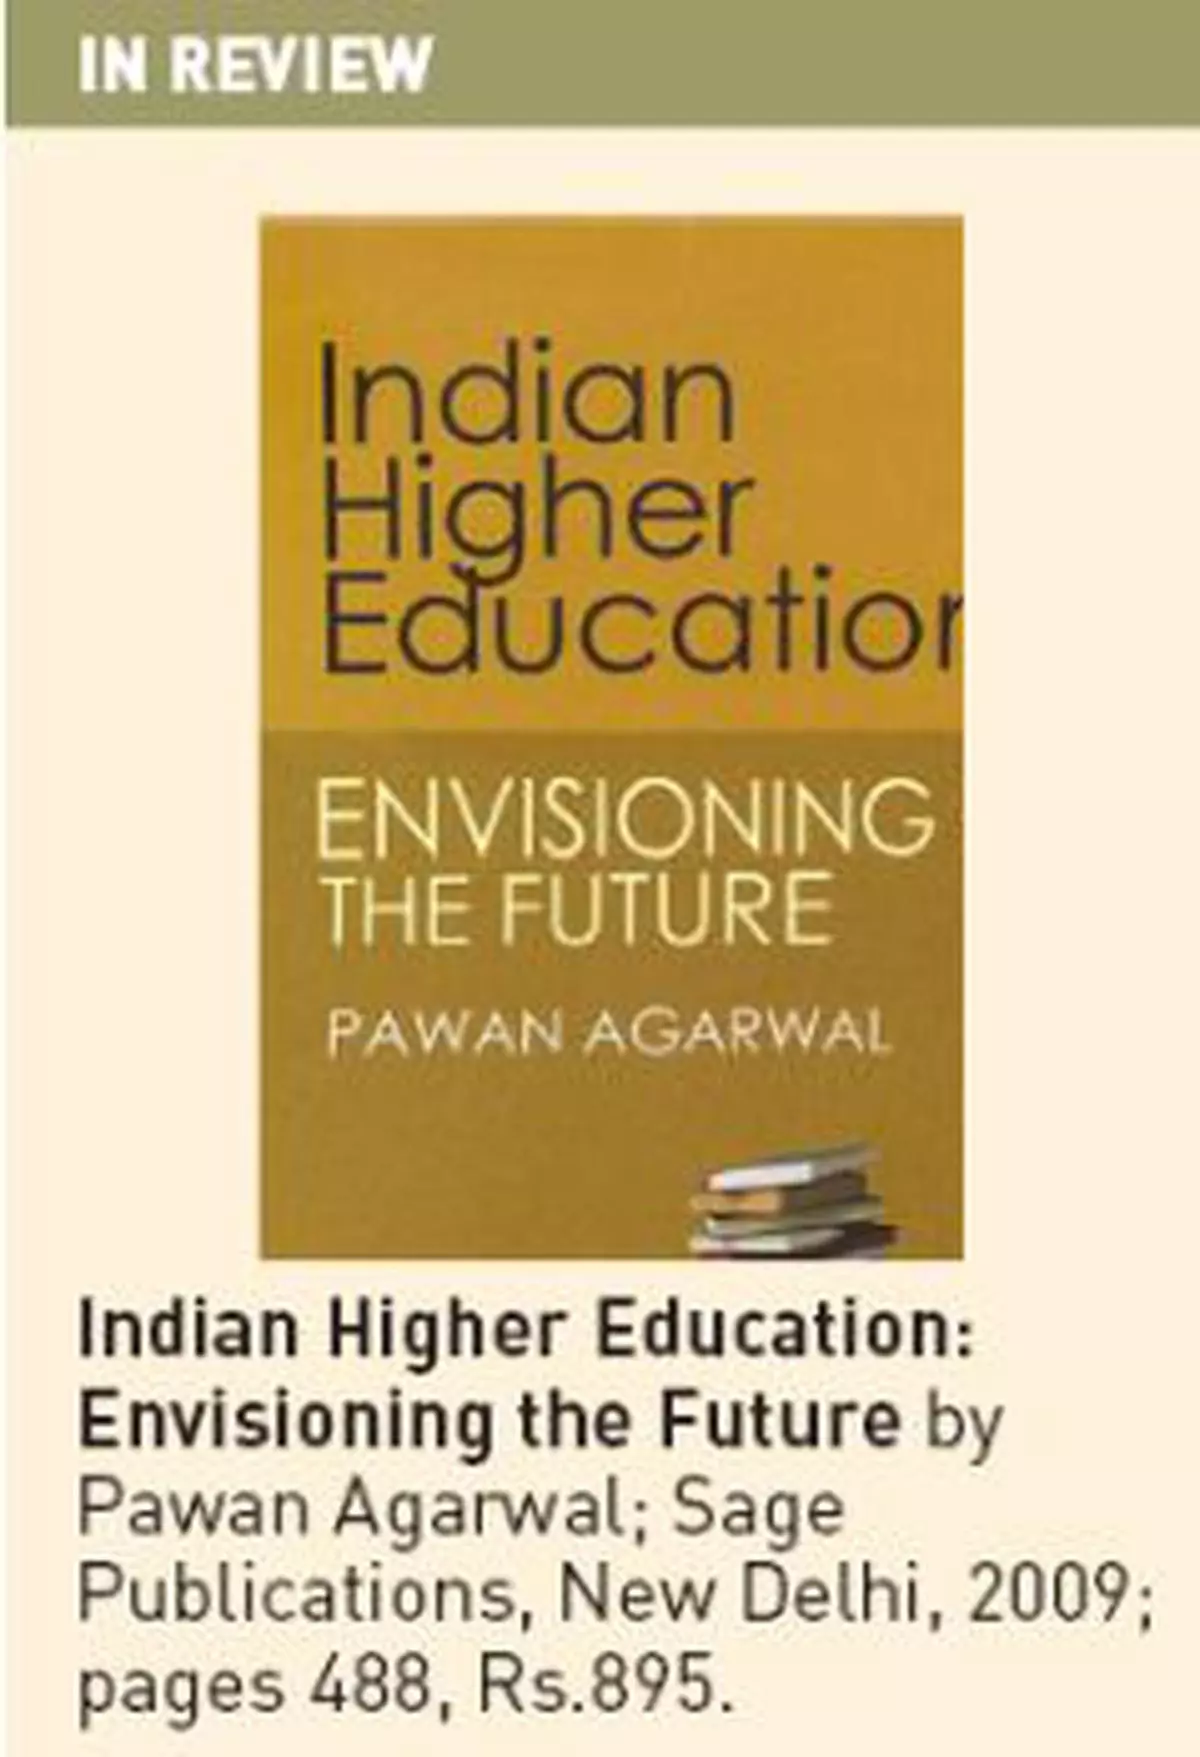 Indian Higher Education: Envisioning the Future by Pawan Agarwal book cover